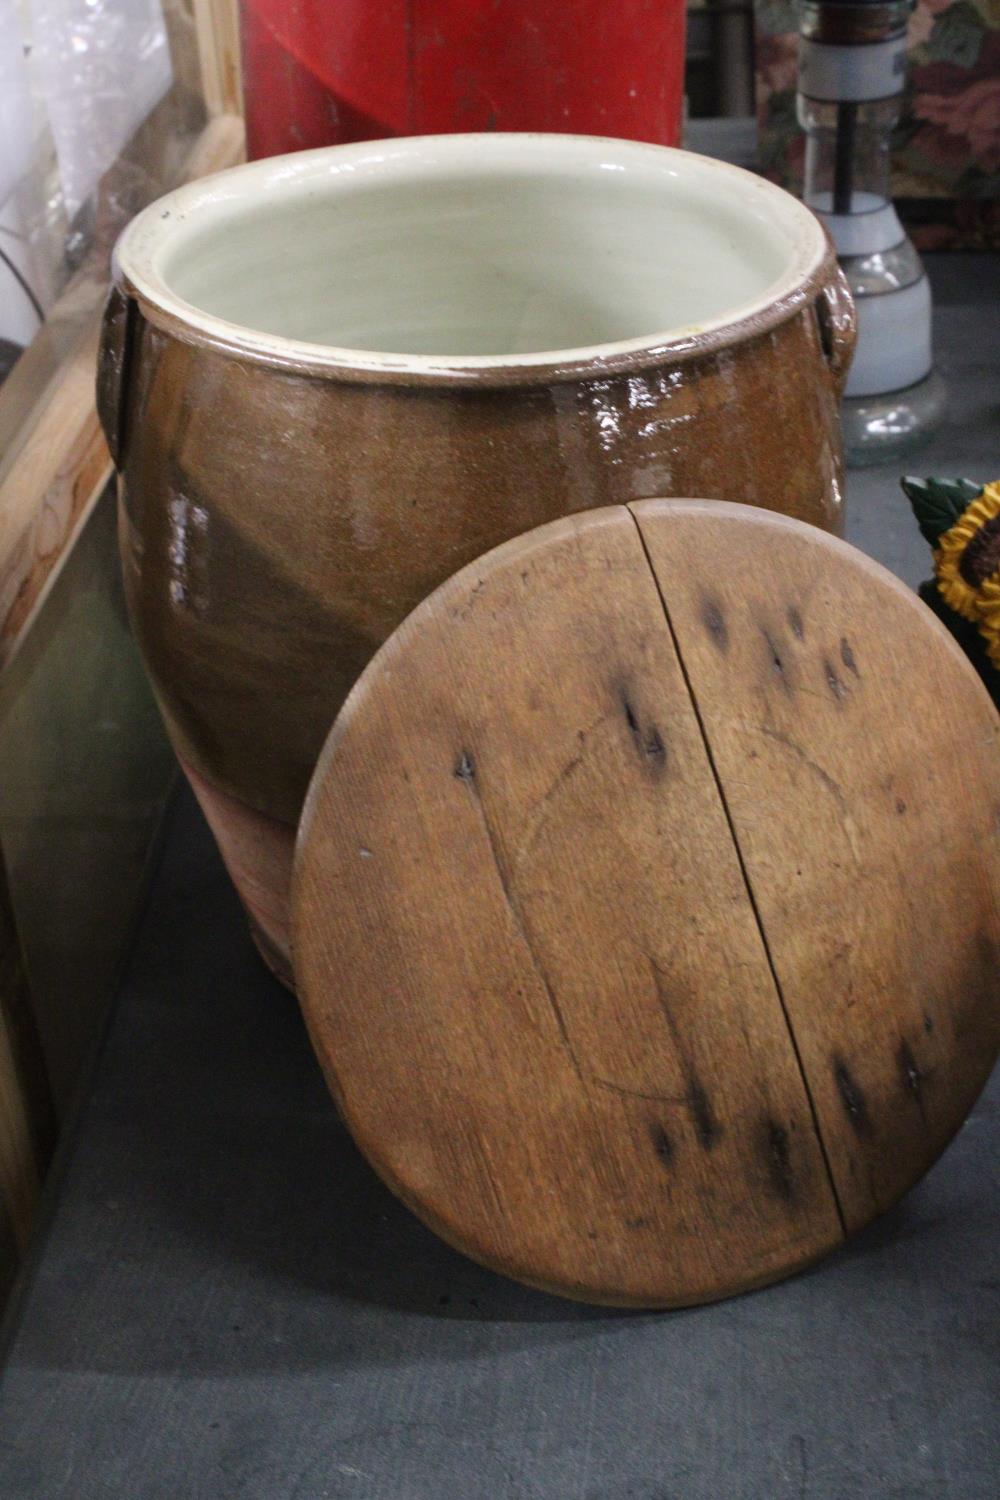 A LARGE HEAVY STONEWARE POT WITH A WOODEN LID, HEIGHT 38CM, DIAMETER 32CM - Image 3 of 4